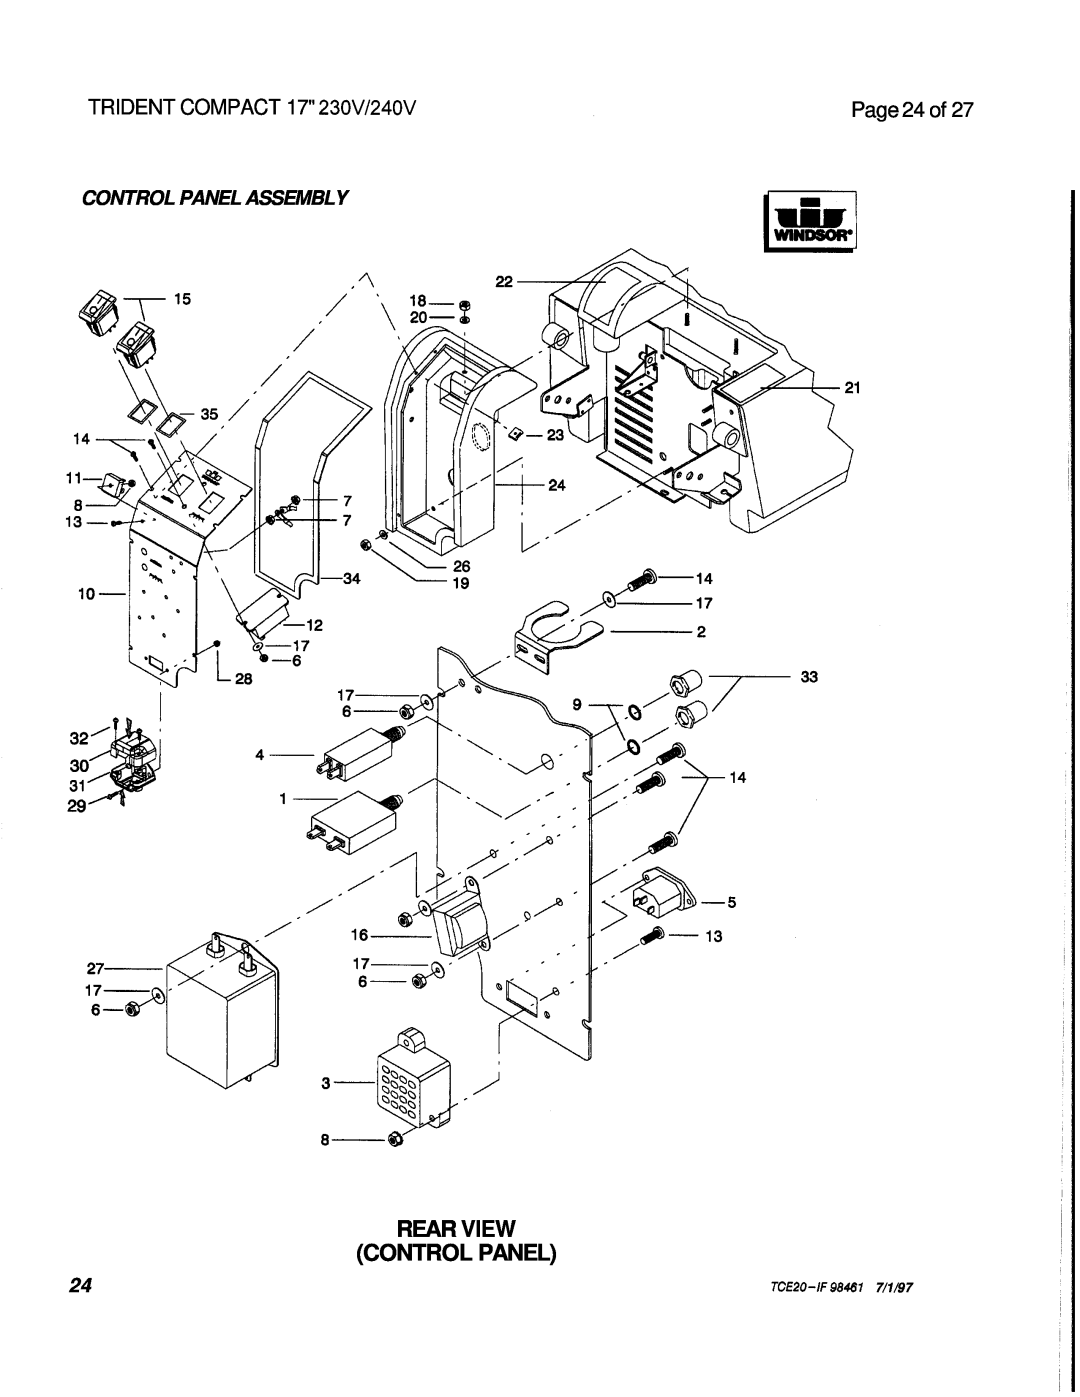 Windsor Rear View Control Panel, Page 24 of, Control Panel Assembly, TRIDENT COMPACT 17 230V/240V, TCE20-IF98461 7/1/97 